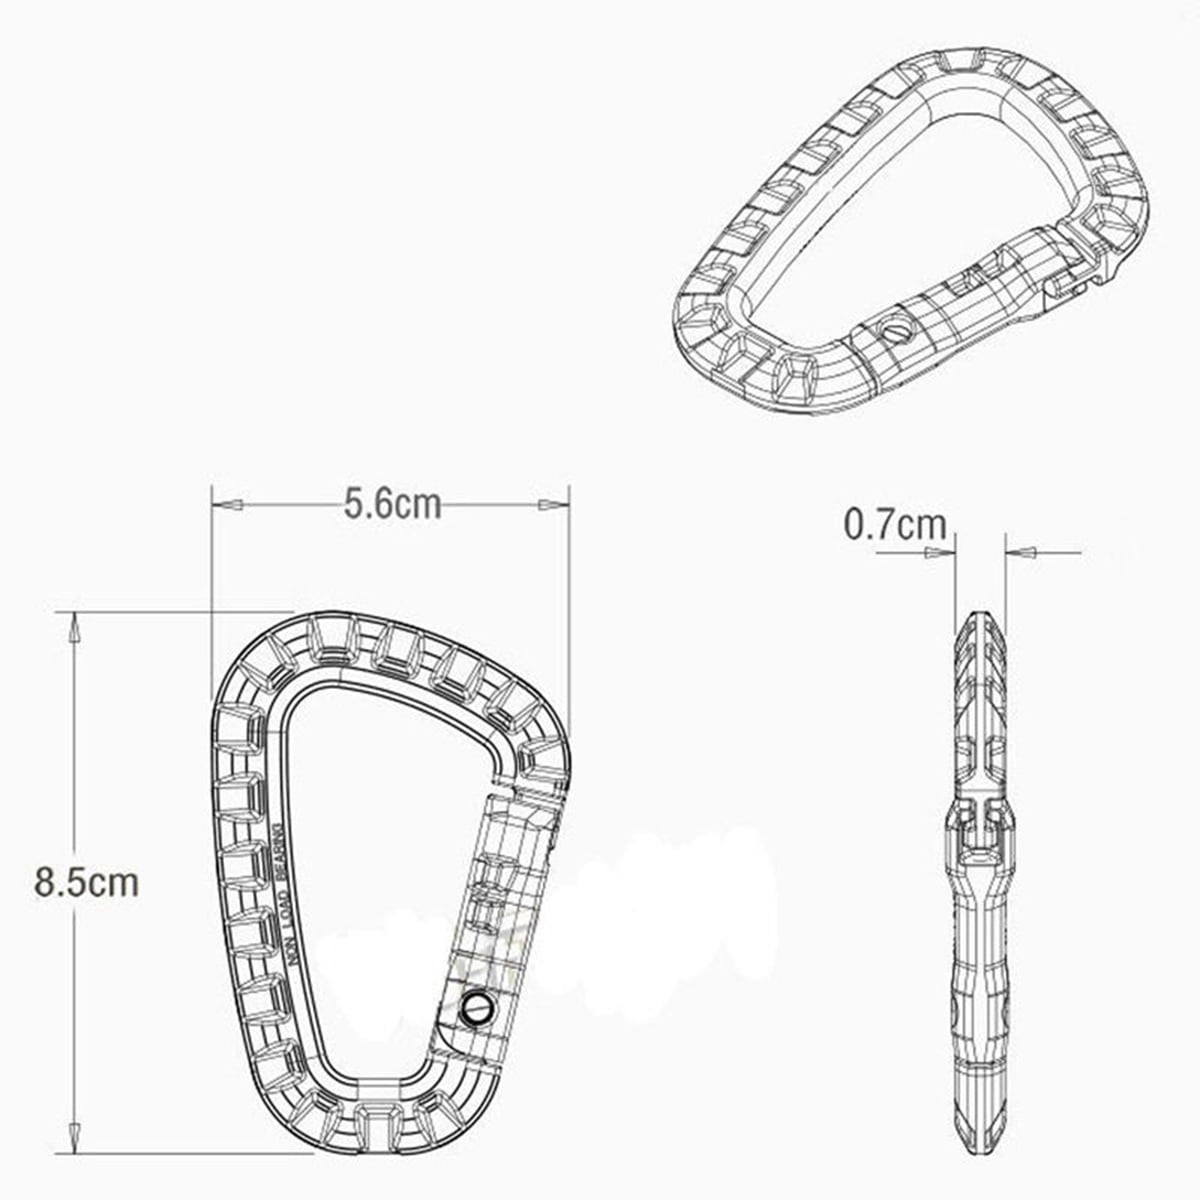 2 Pcs Plastic Carabiner D-Ring Key Chain Clip Hook Outdoor Camping Buckle Snap 